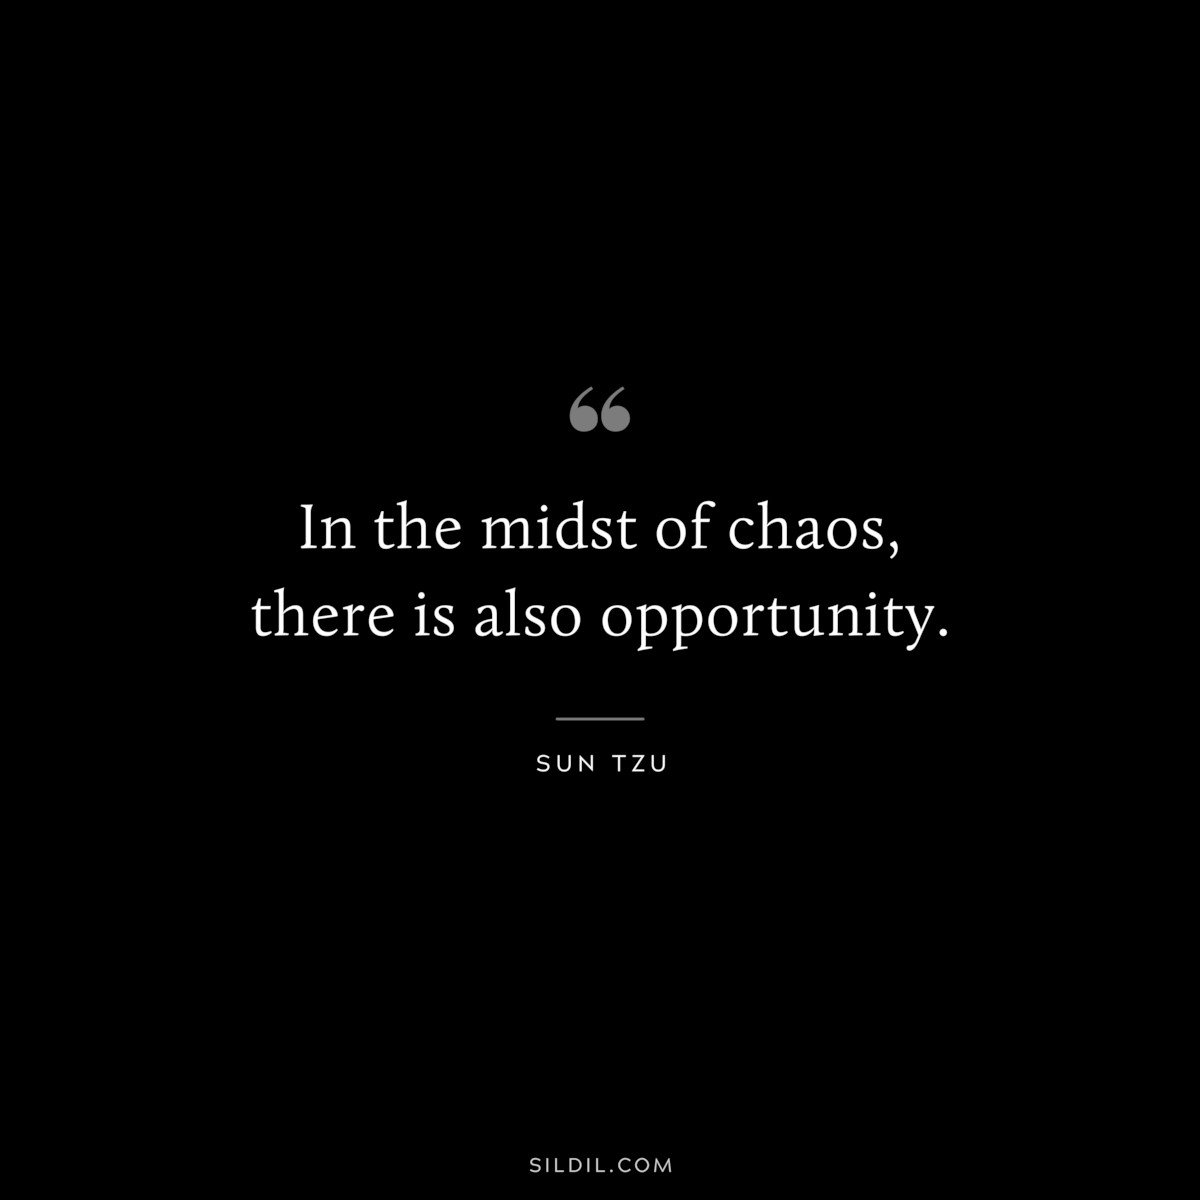 In the midst of chaos, there is also opportunity. ― Sun Tzu